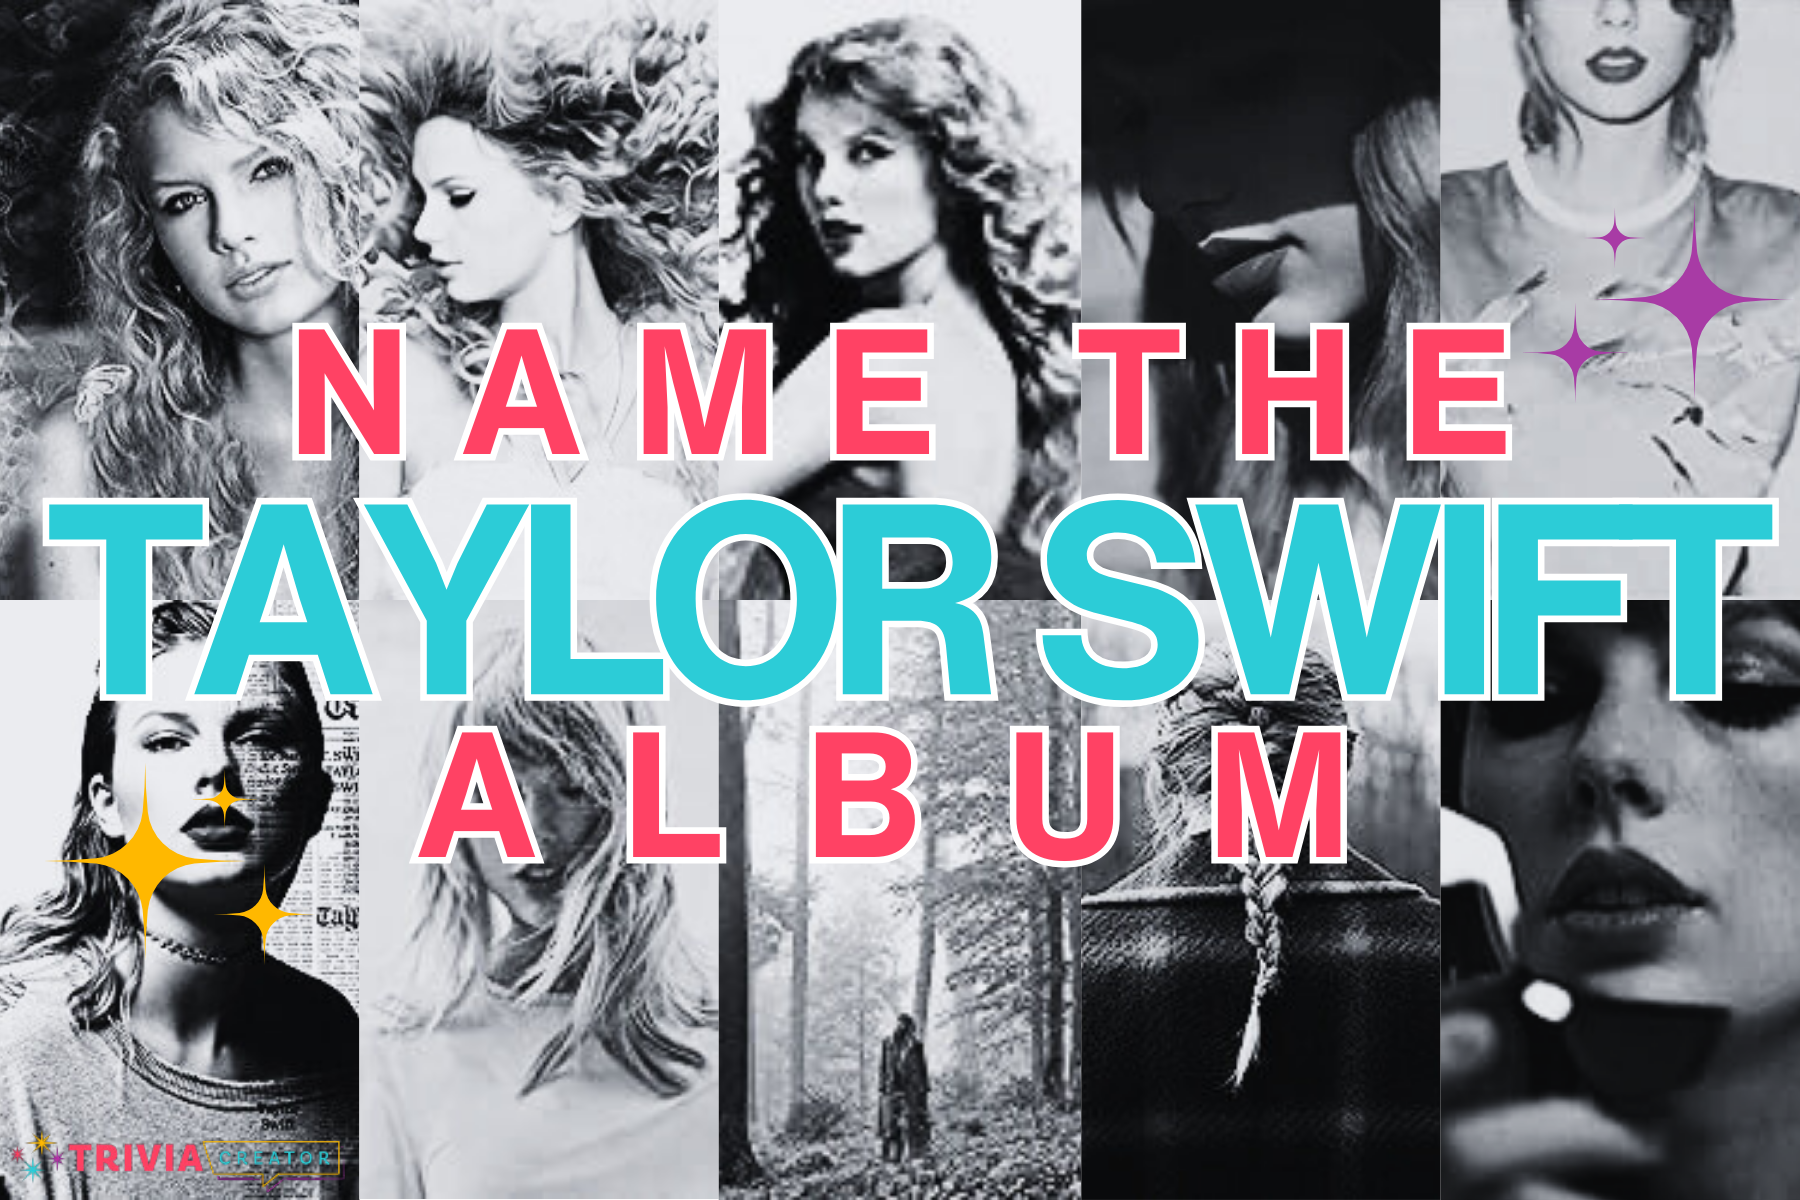 Can You Name the Taylor Swift Album Cover? (type in answer)